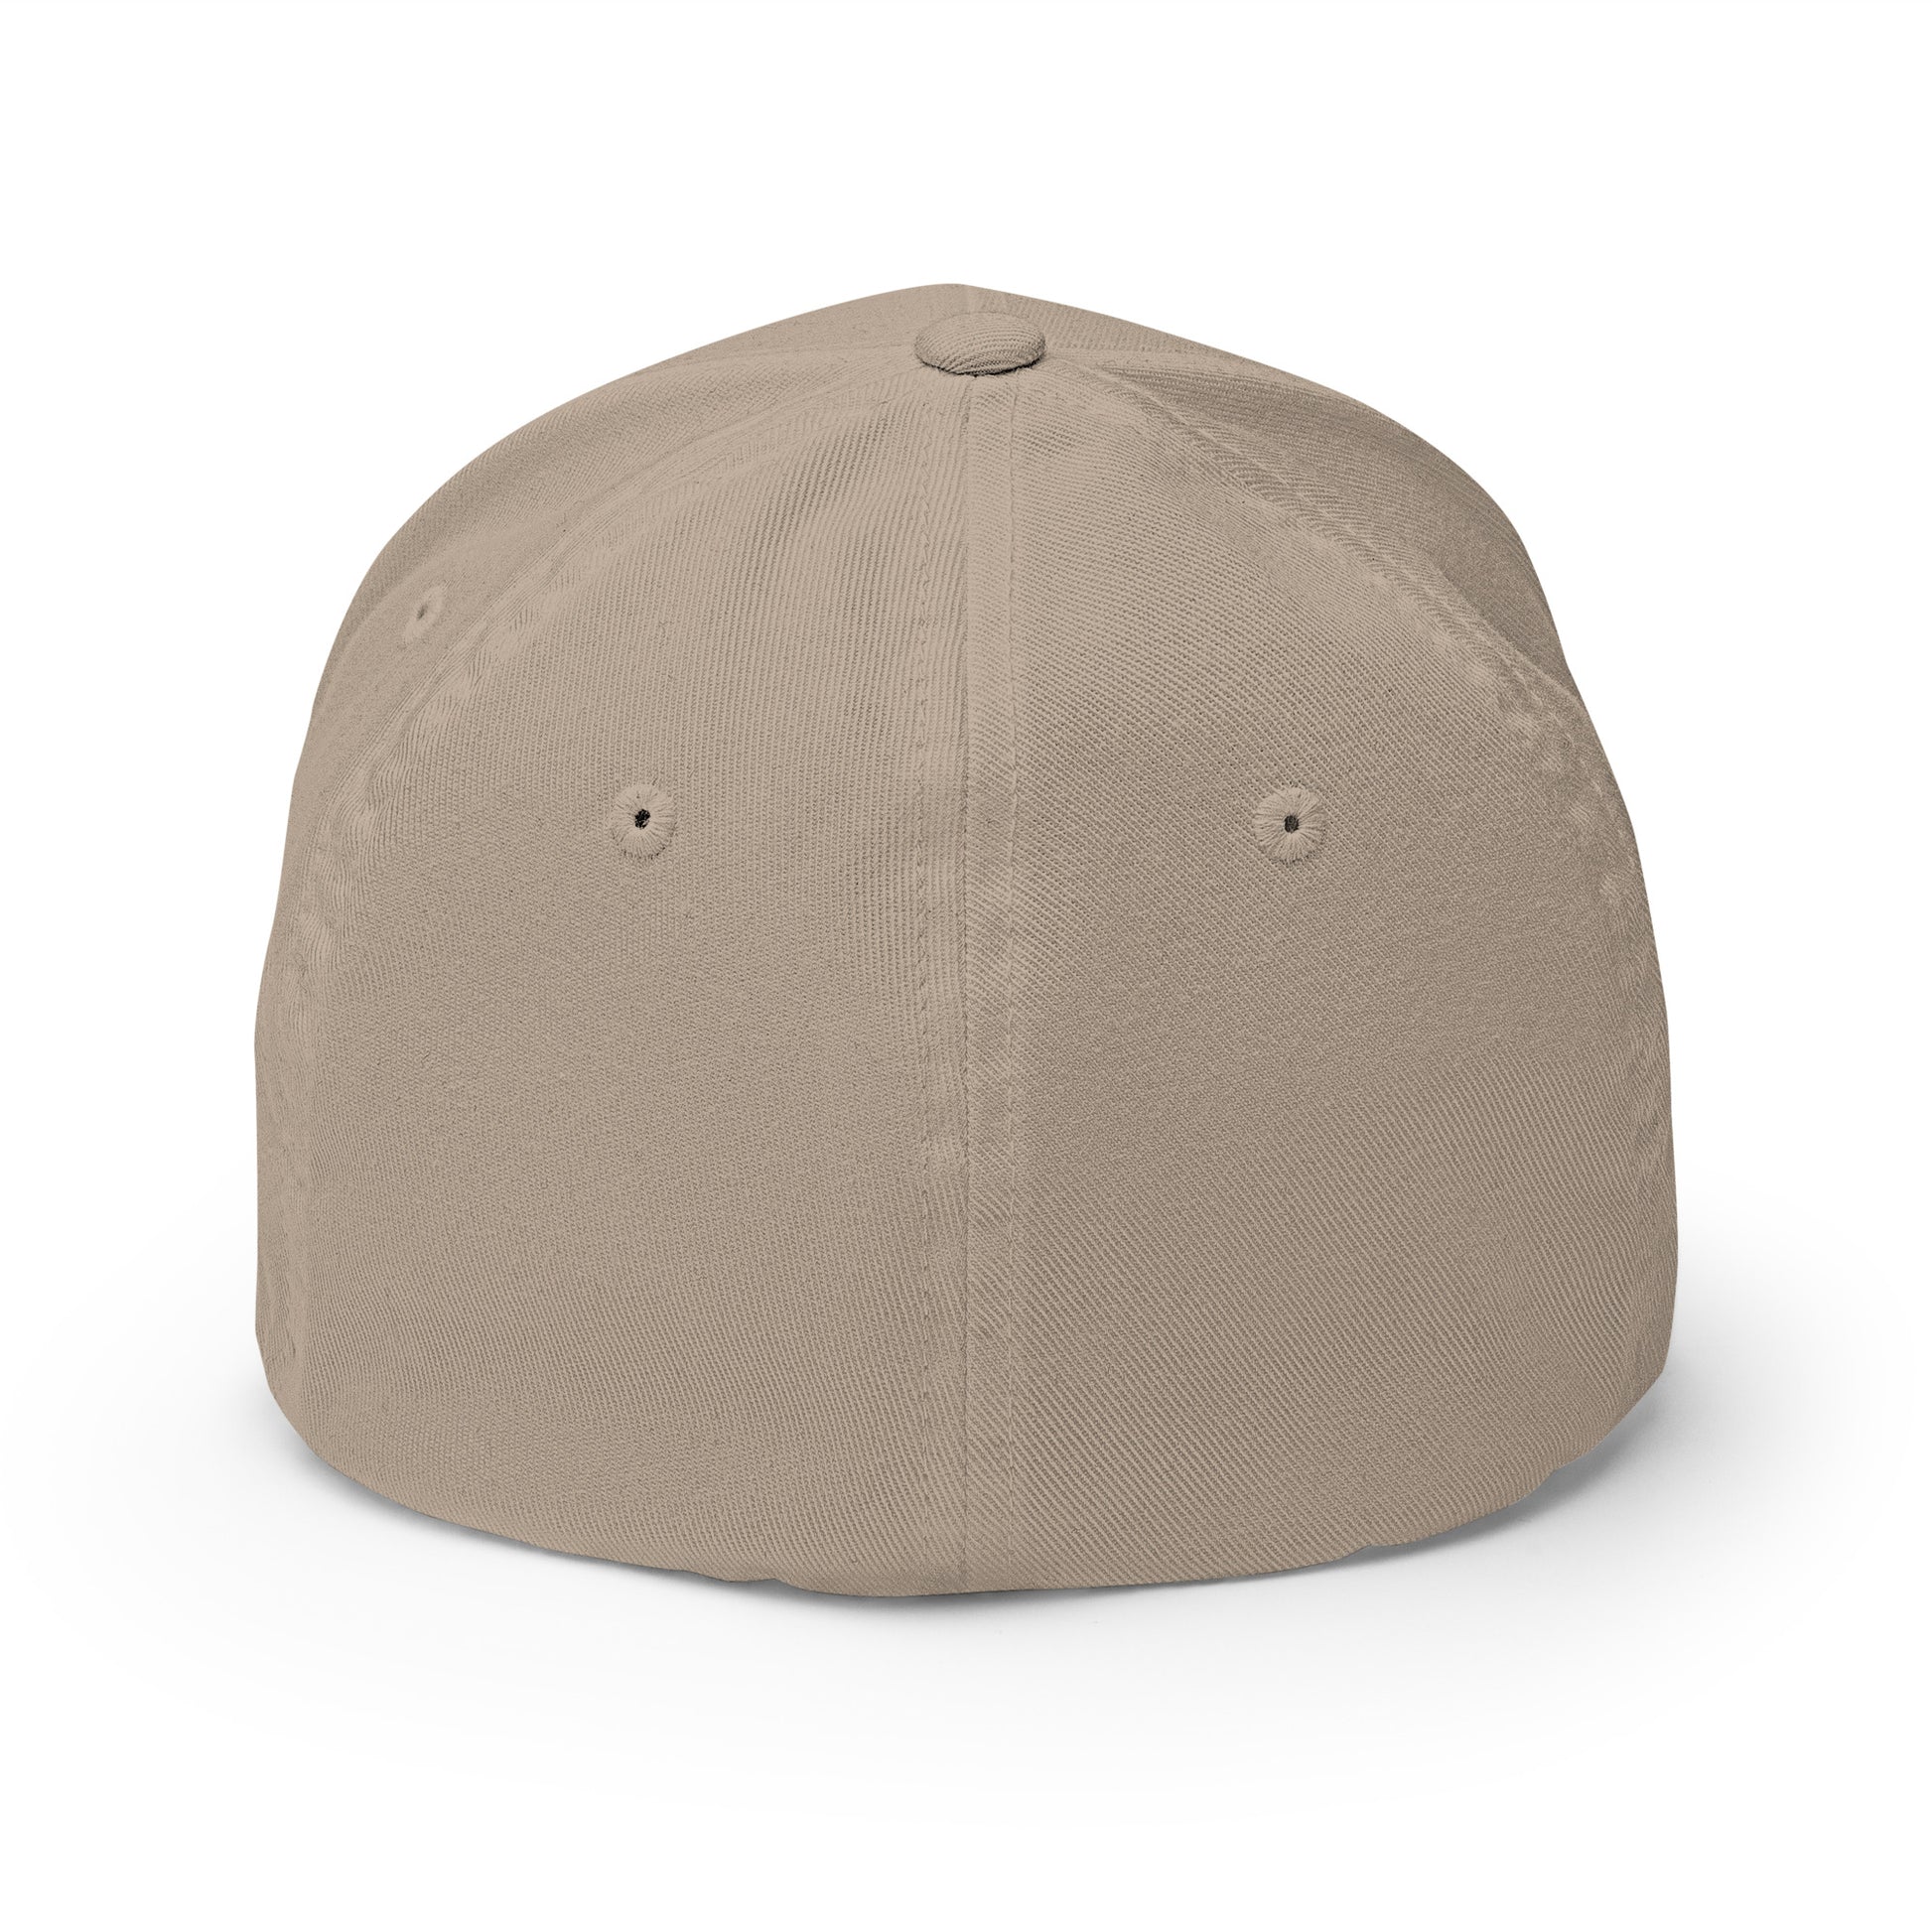  cap-from-the-back-with-bible-symbol